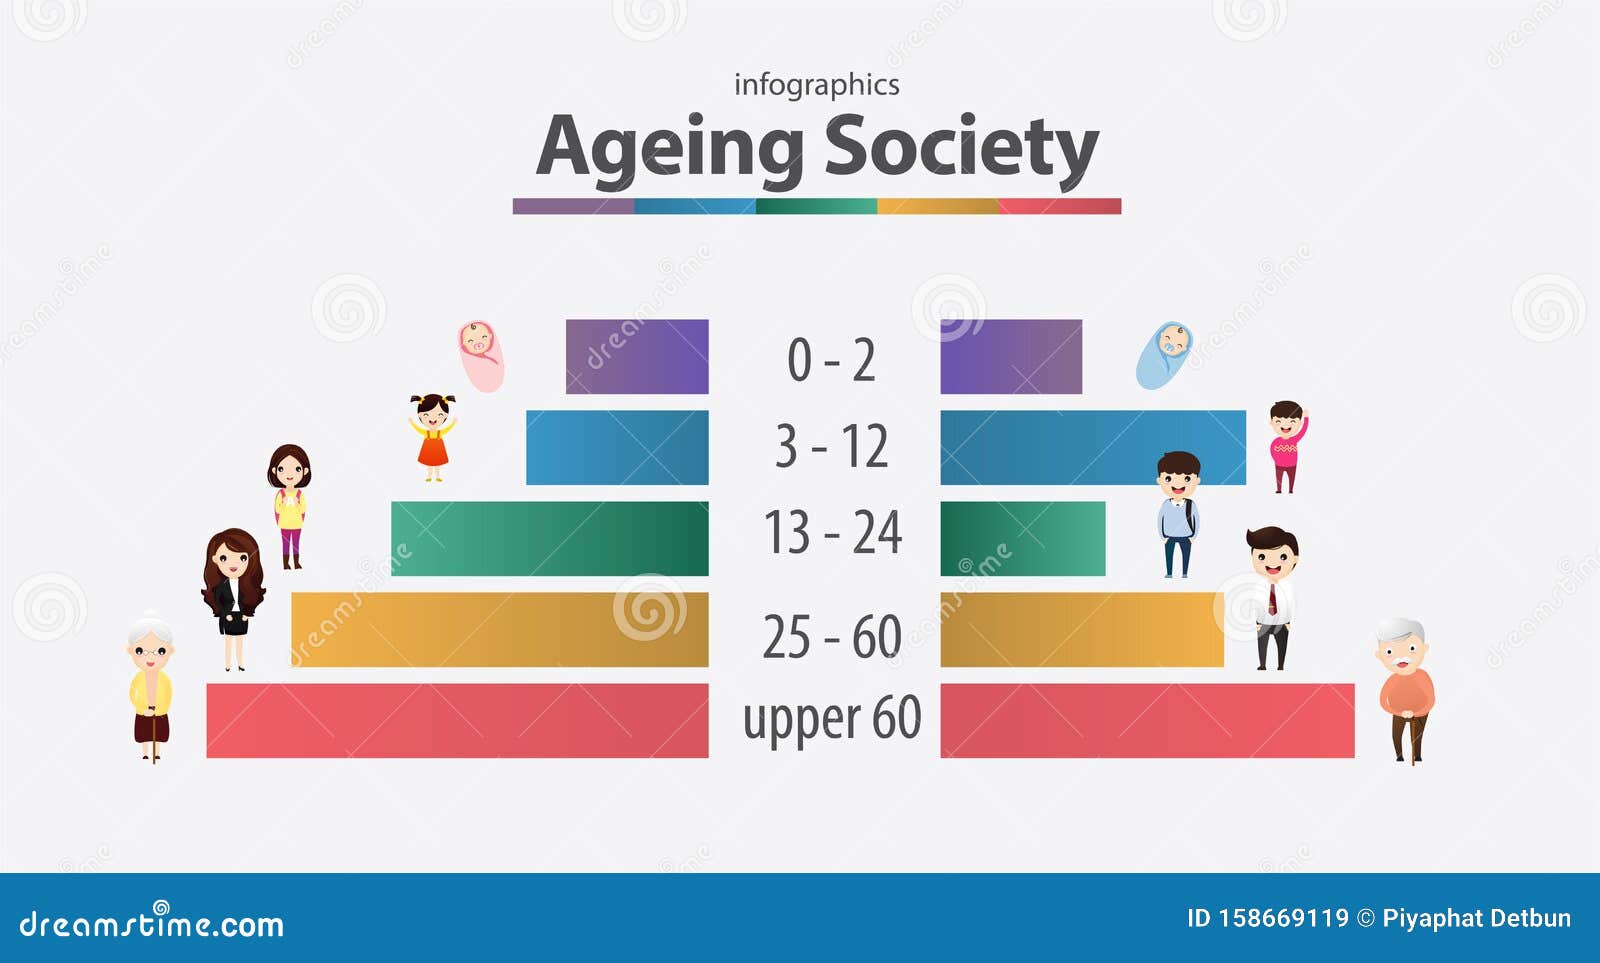 Ageing society